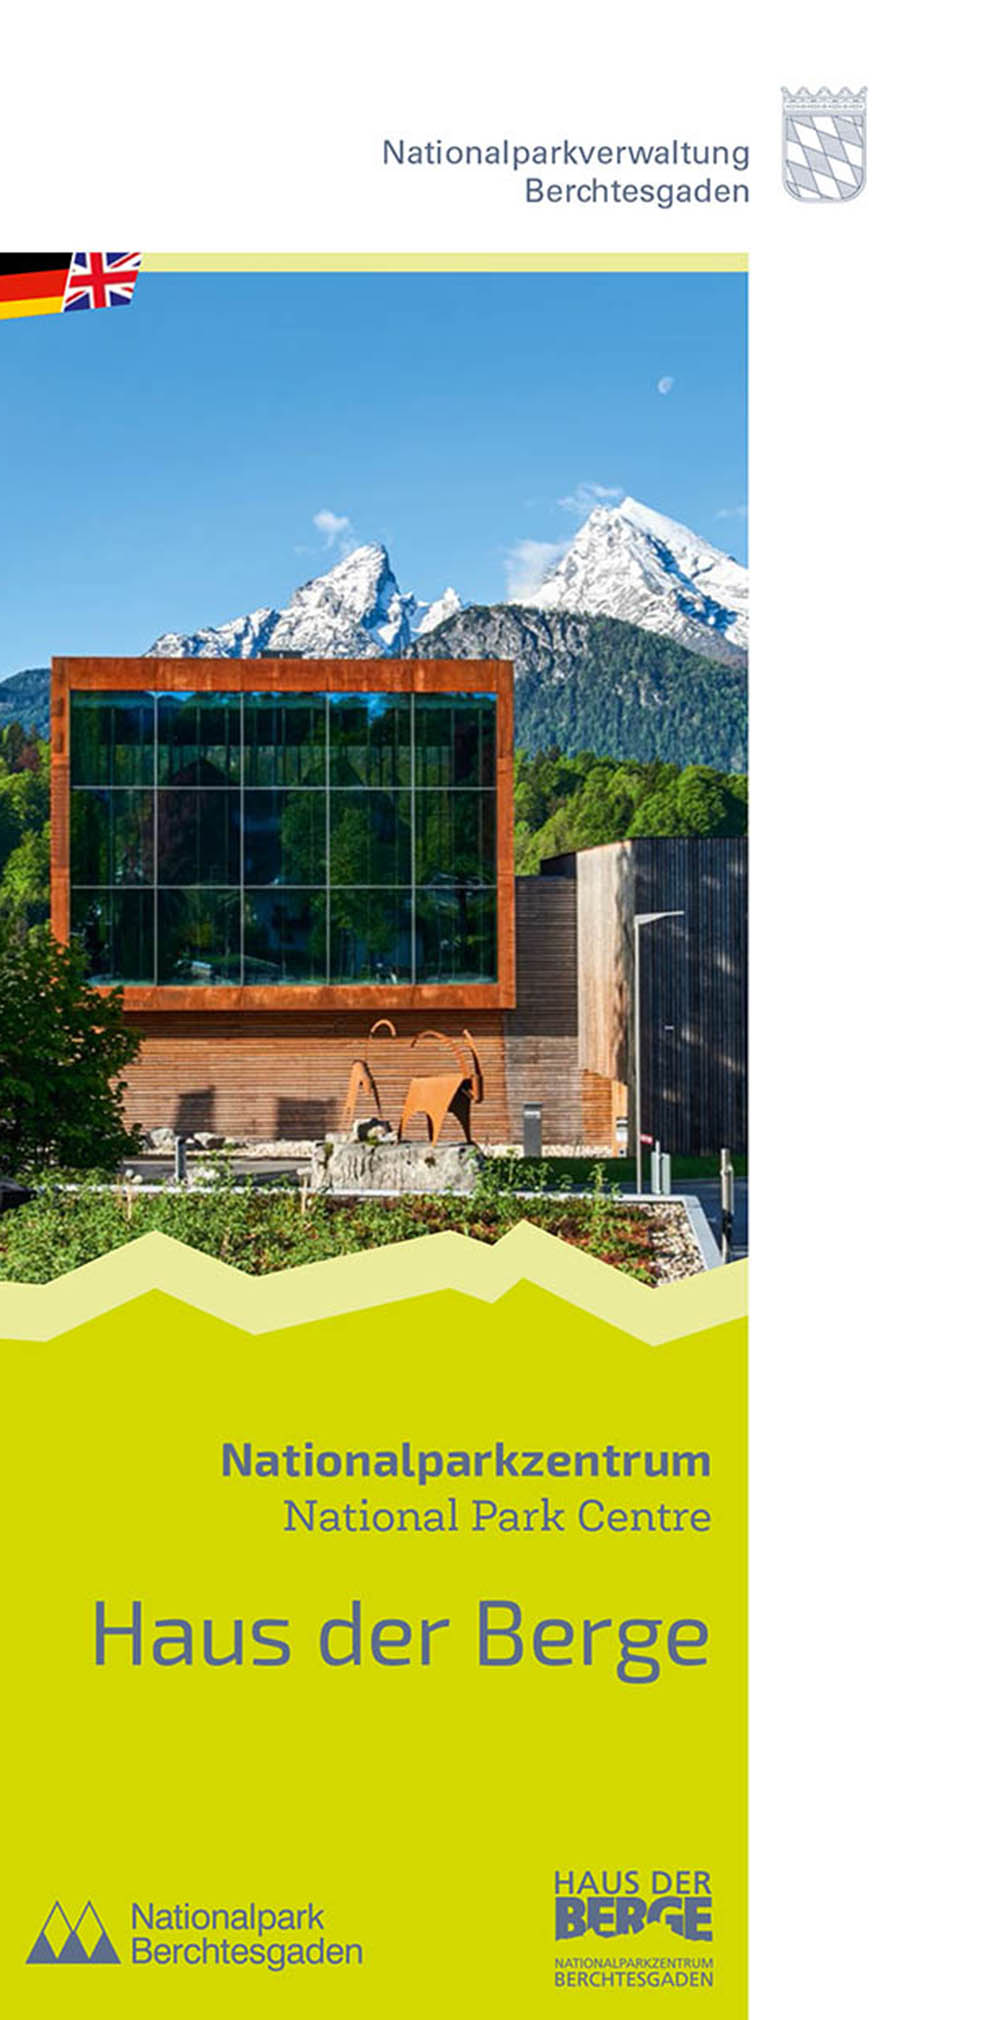 National Park Center Haus der Berge Programs, Opening Hours, Prices & Arrival